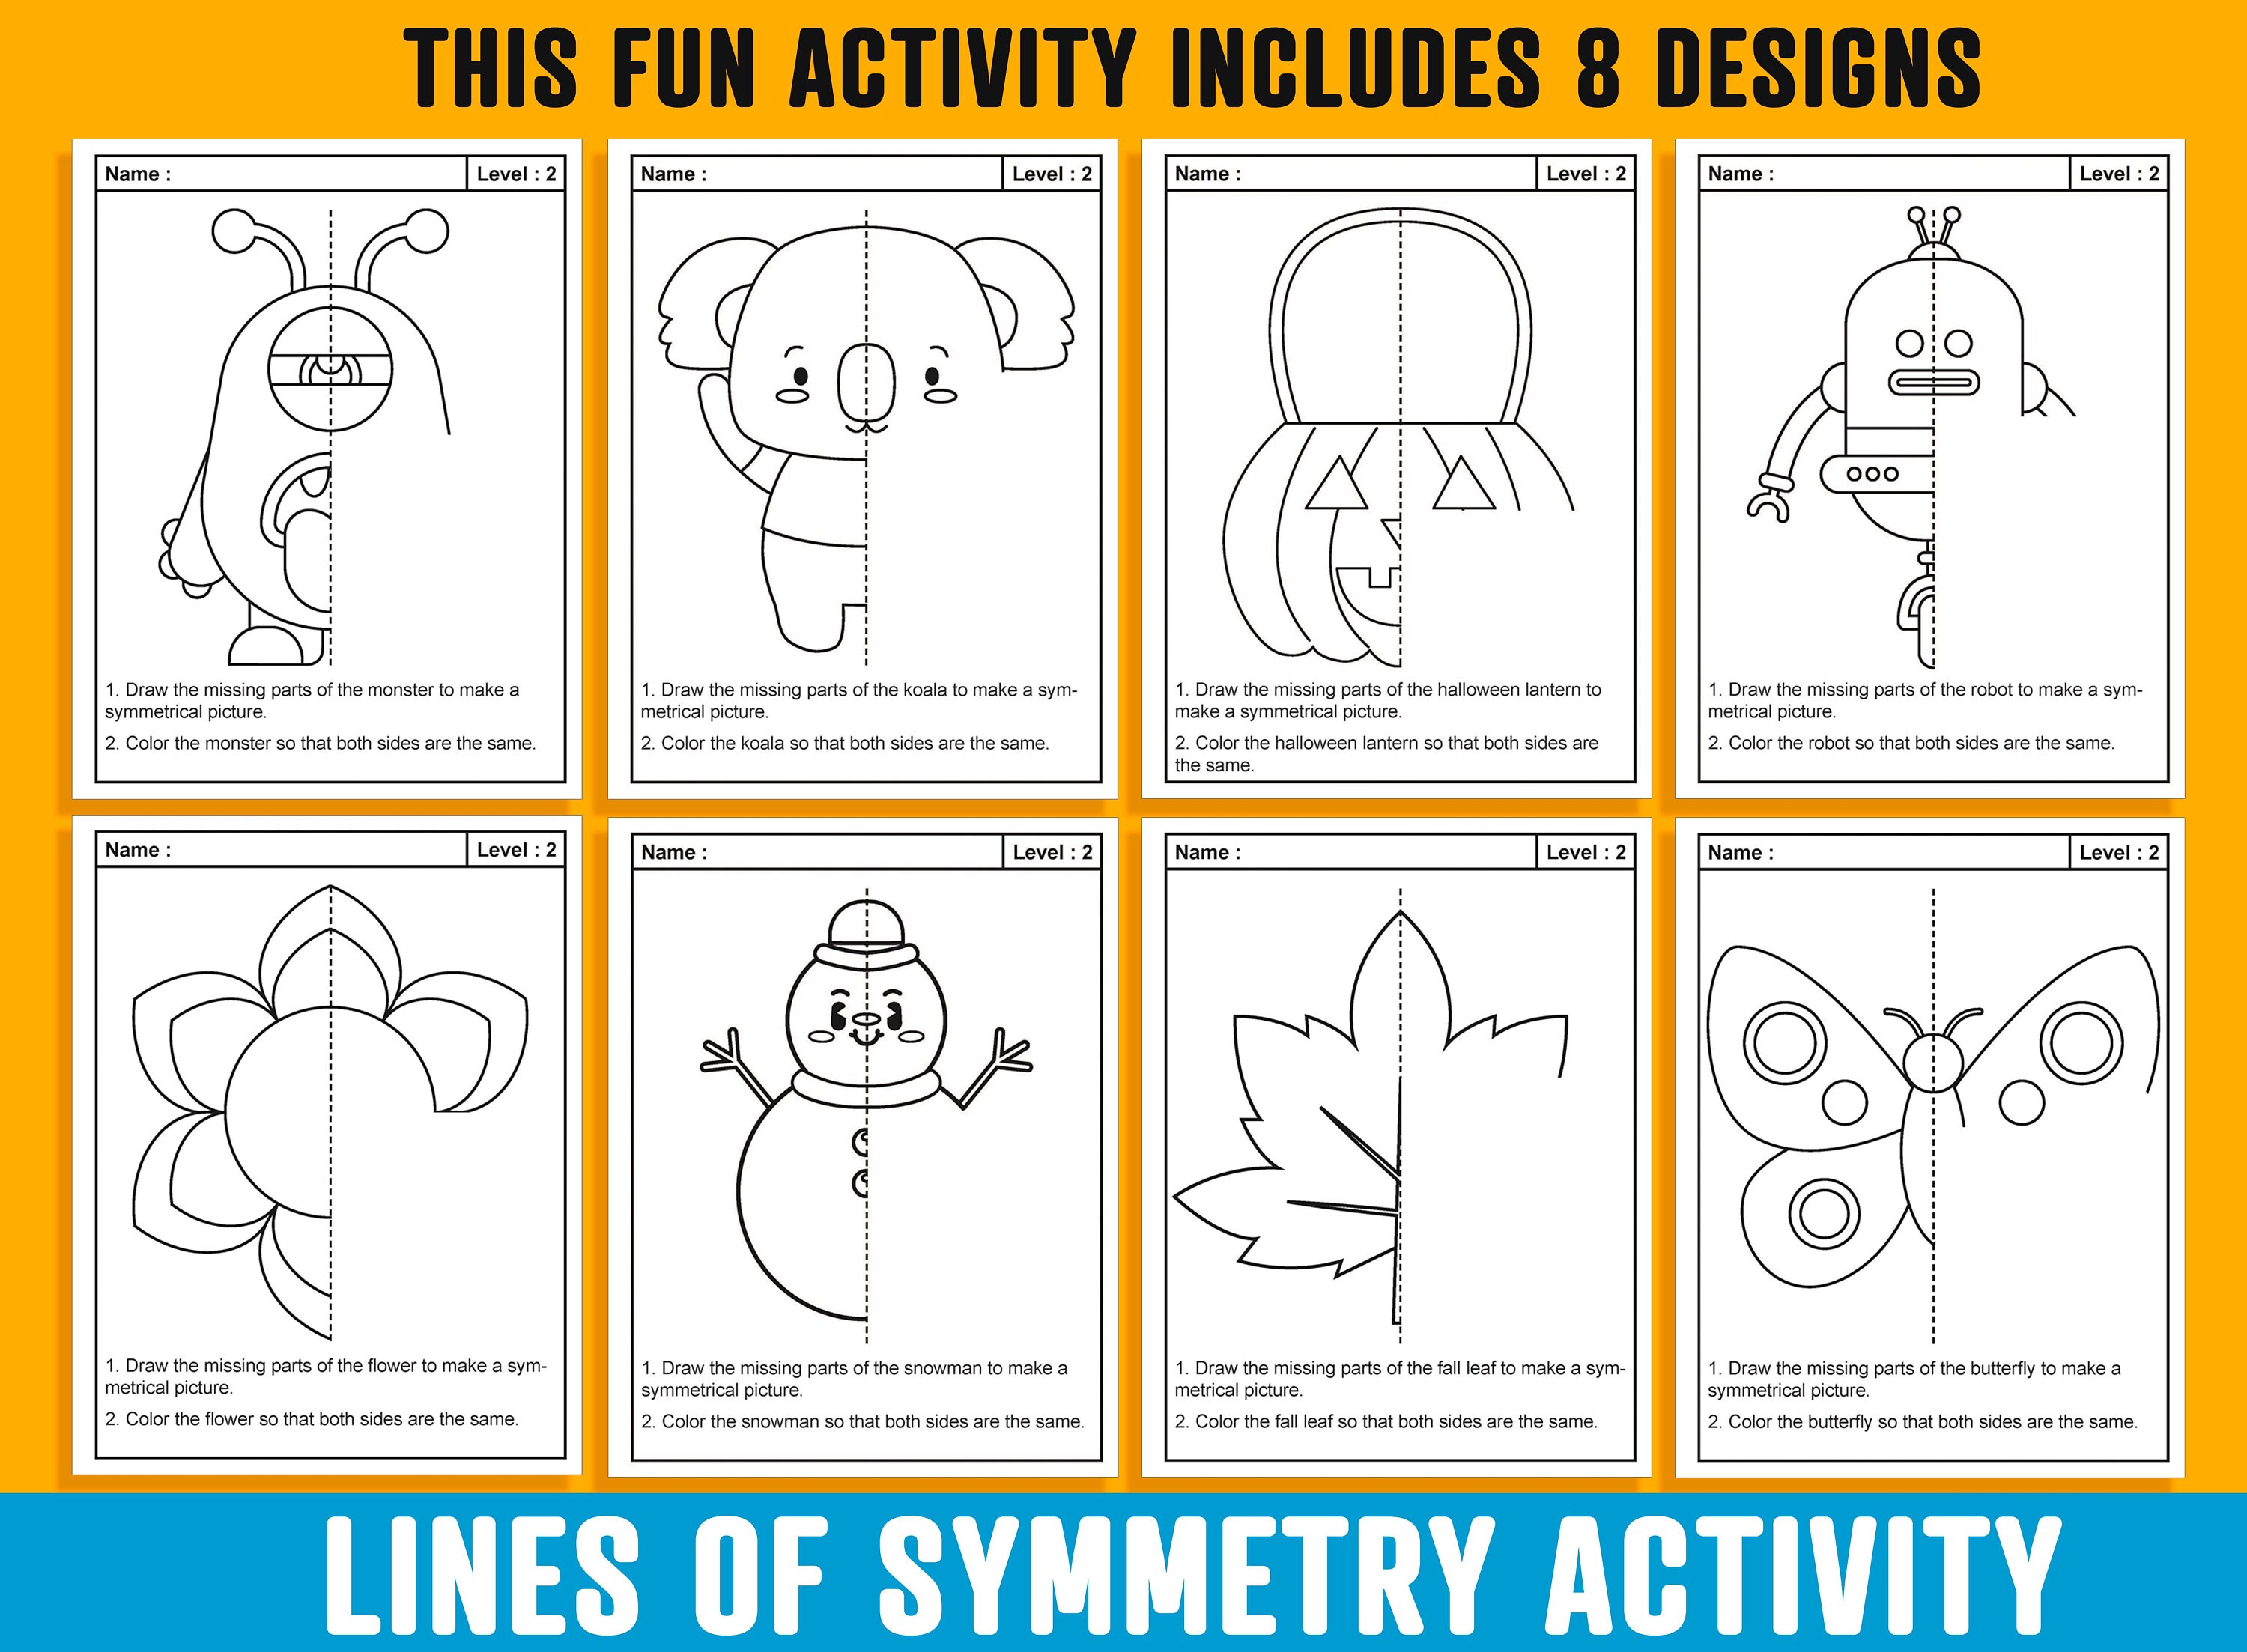 Lines of symmetry activity pages designs each with levels of difficulty math art activity symmetry drawing and coloring activity